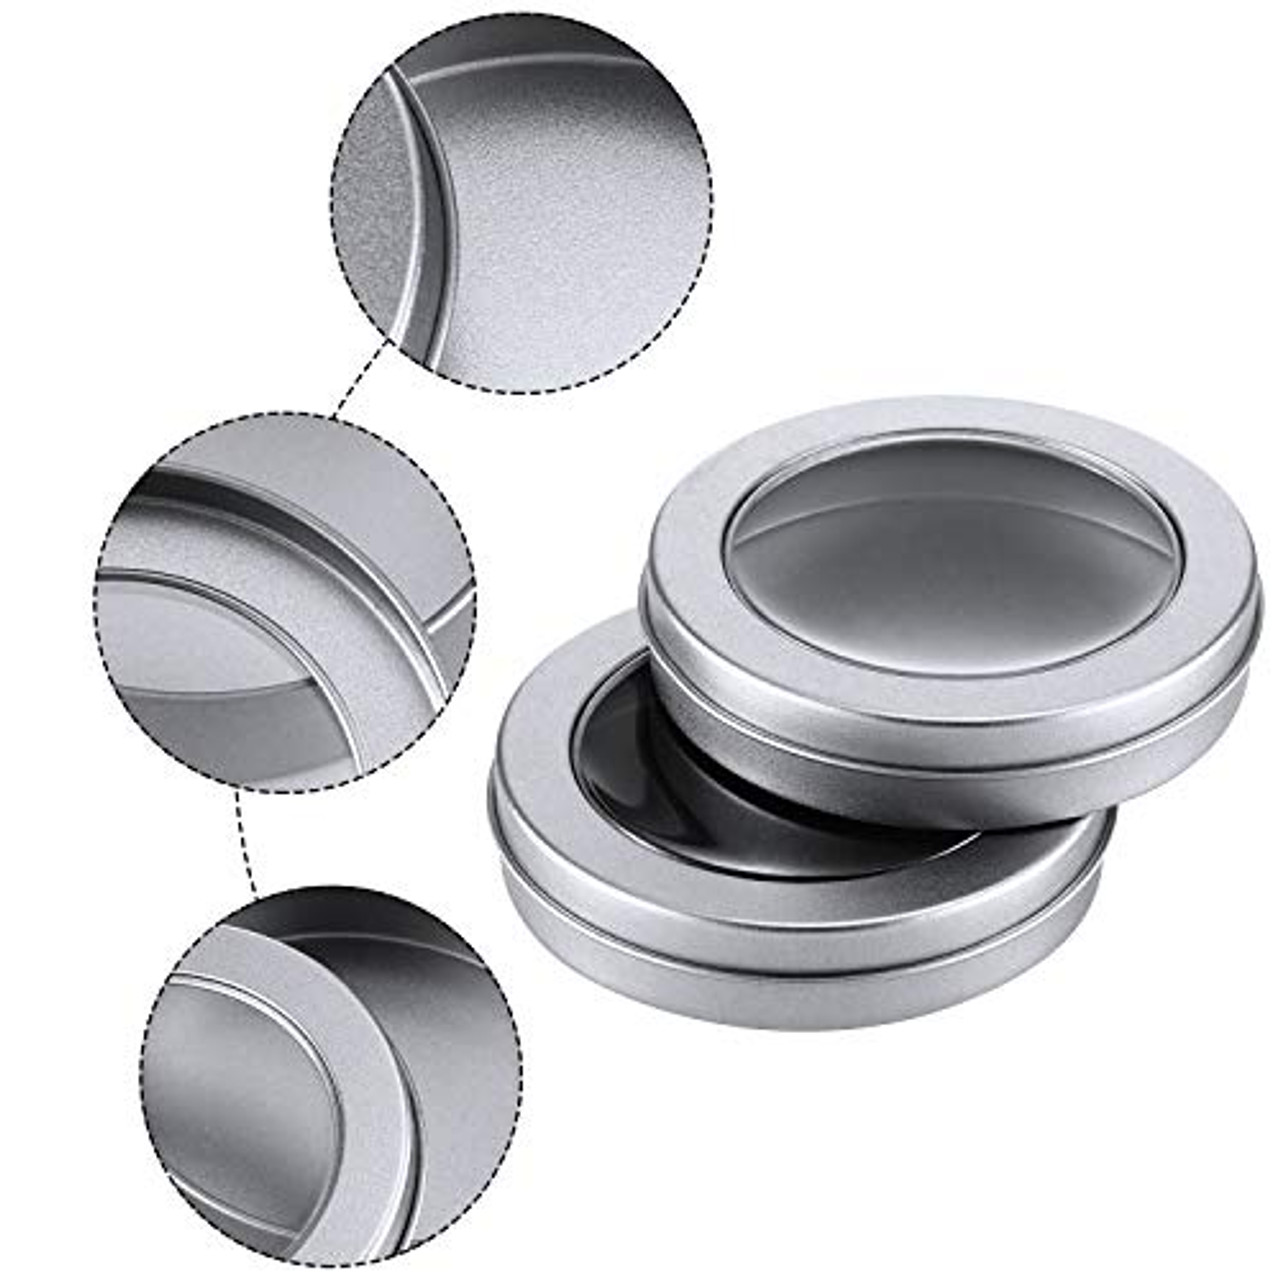 Patelai 36 Pieces 2 Oz Round Tin Containers Metal Tin Cans Aluminum Tin  Storage Cans and 5 Sheets Stickers for Salve Spice Candies Candles Kitchen  Office Storage, Silver Color